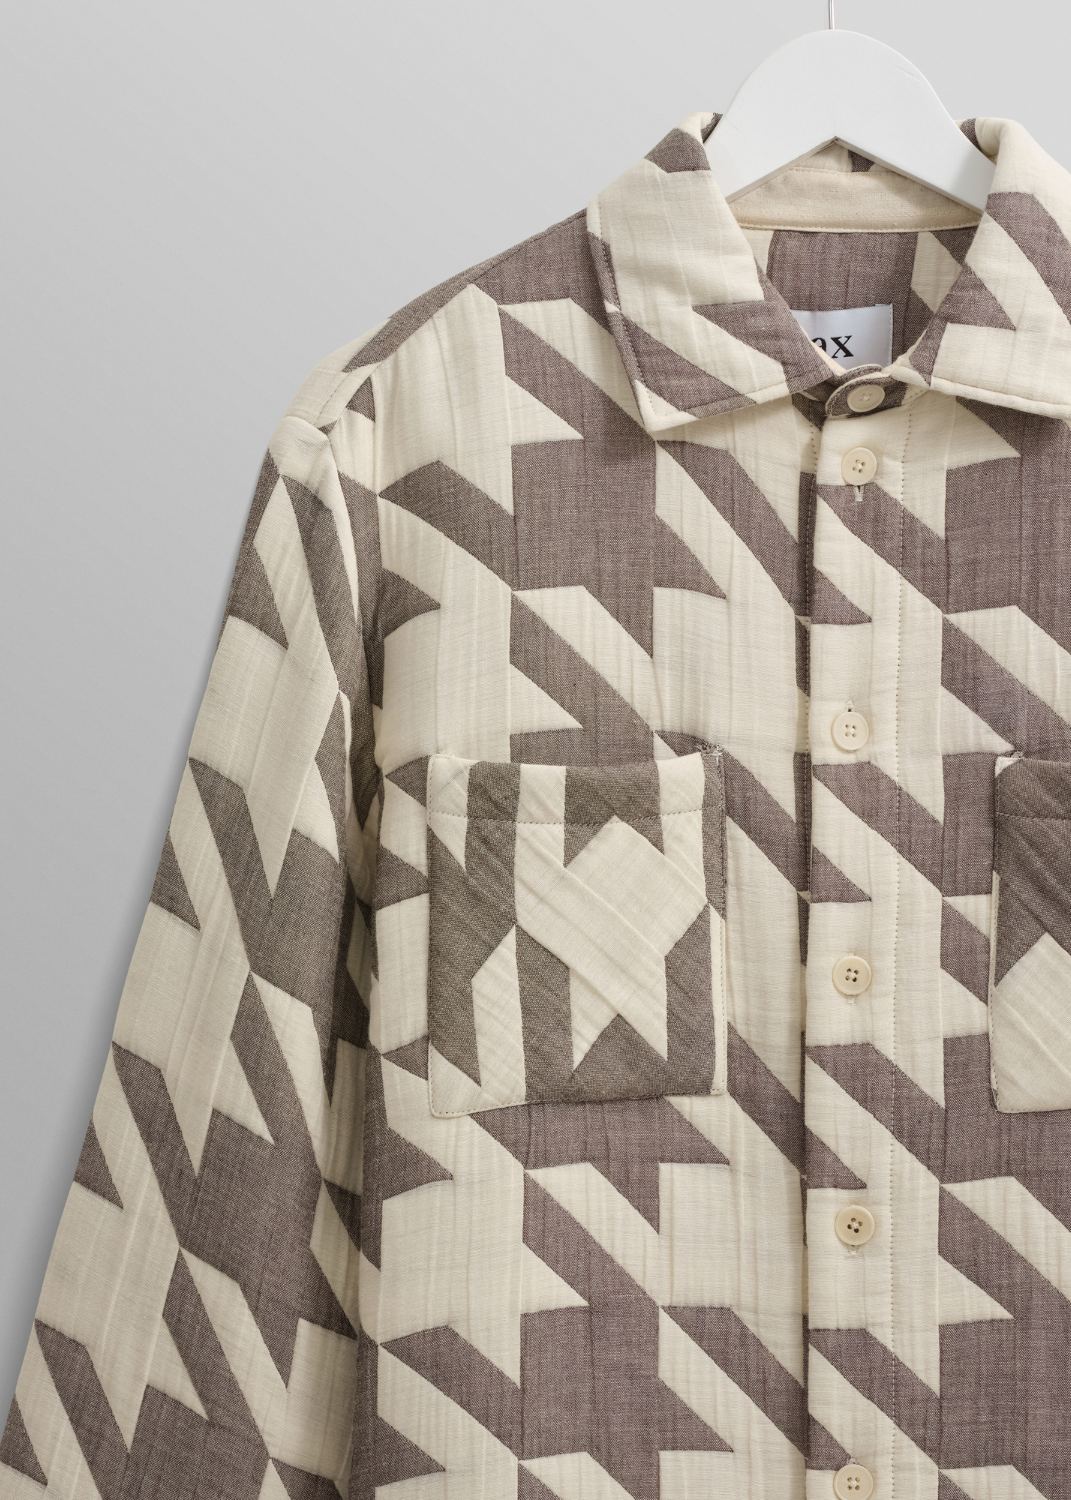 WAX LONDON WHITING QUILT OVERSHIRT